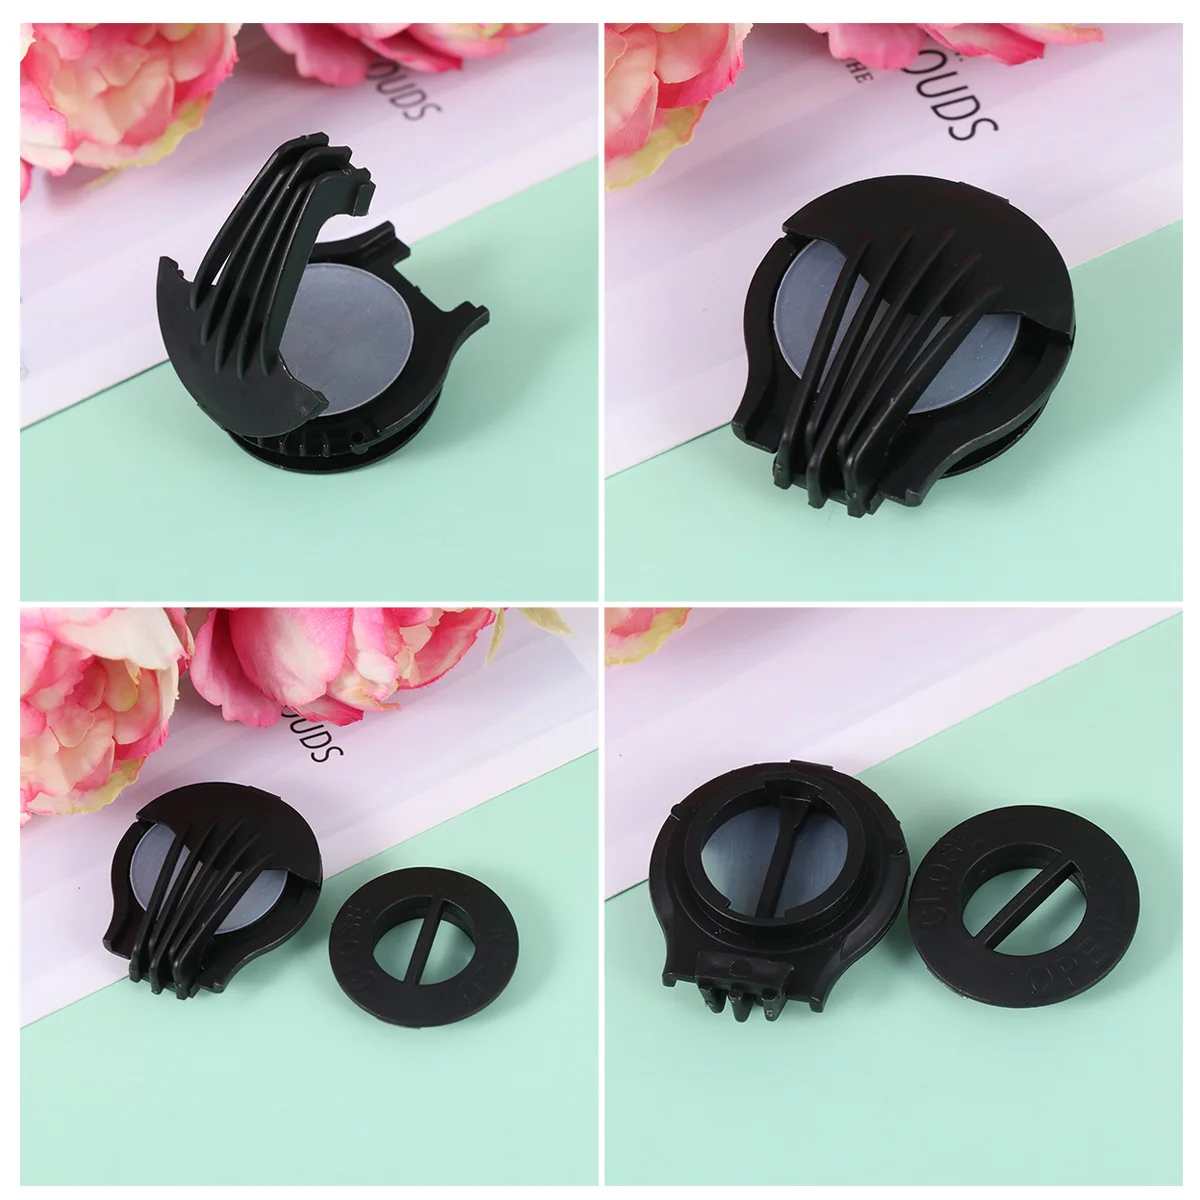 

24pcs Cover Valves Anti Pollution Cover Mouth Filter Breathing Windproof Foggy Haze Cover Filter for Shop Store Home